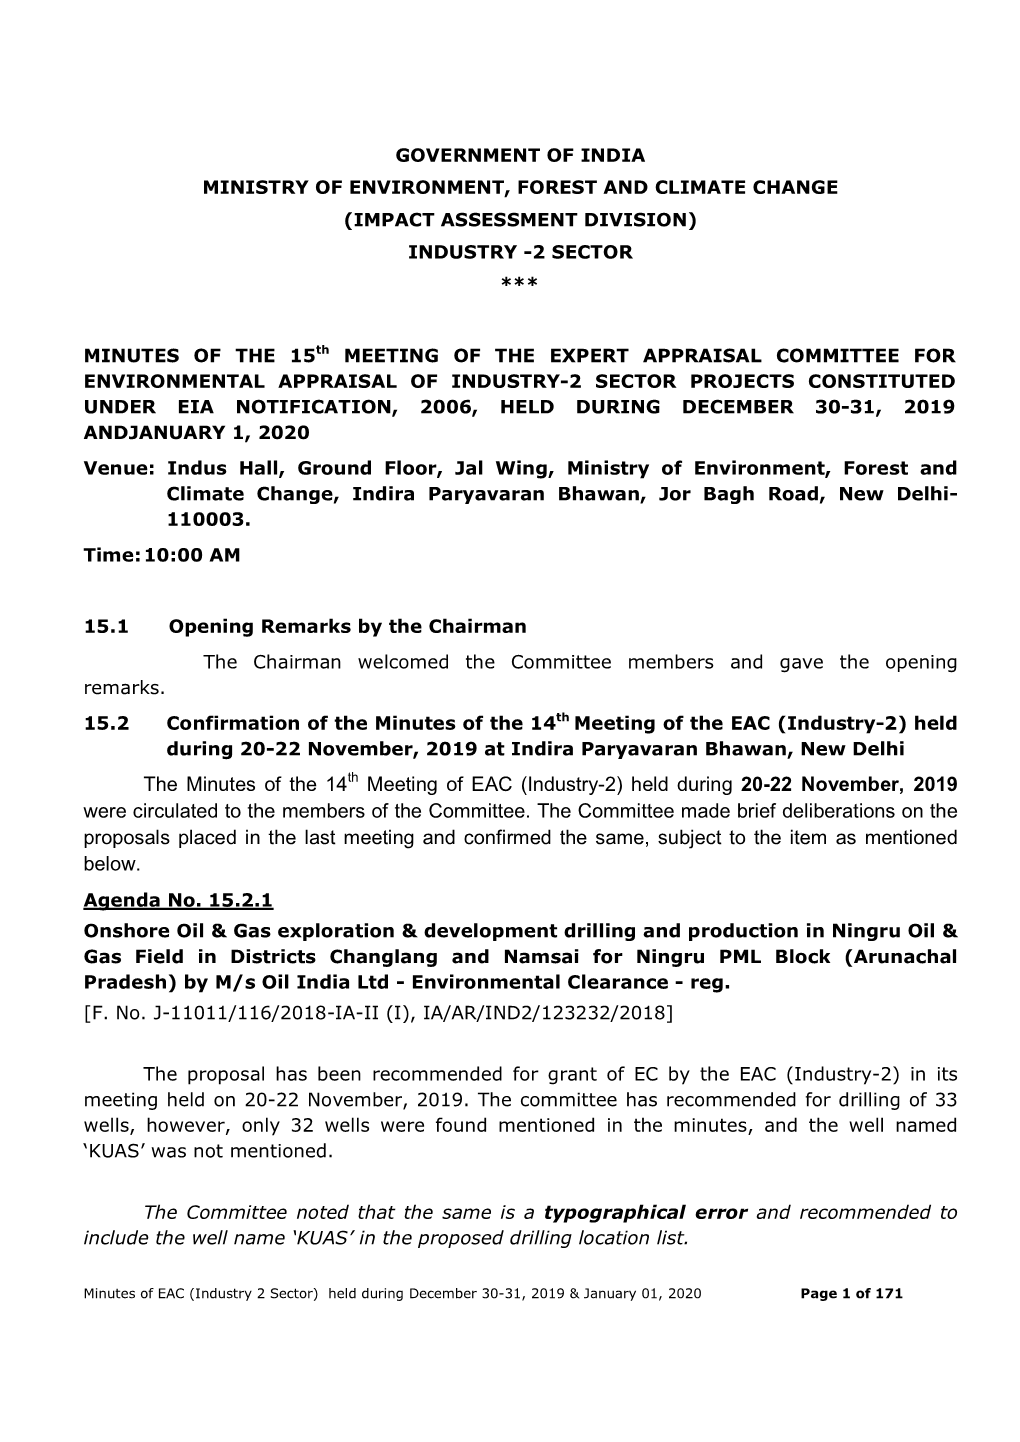 The Minutes of the 14Th Meeting of EAC (Industry-2) Held During 20-22 November, 2019 Were Circulated to the Members of the Committee